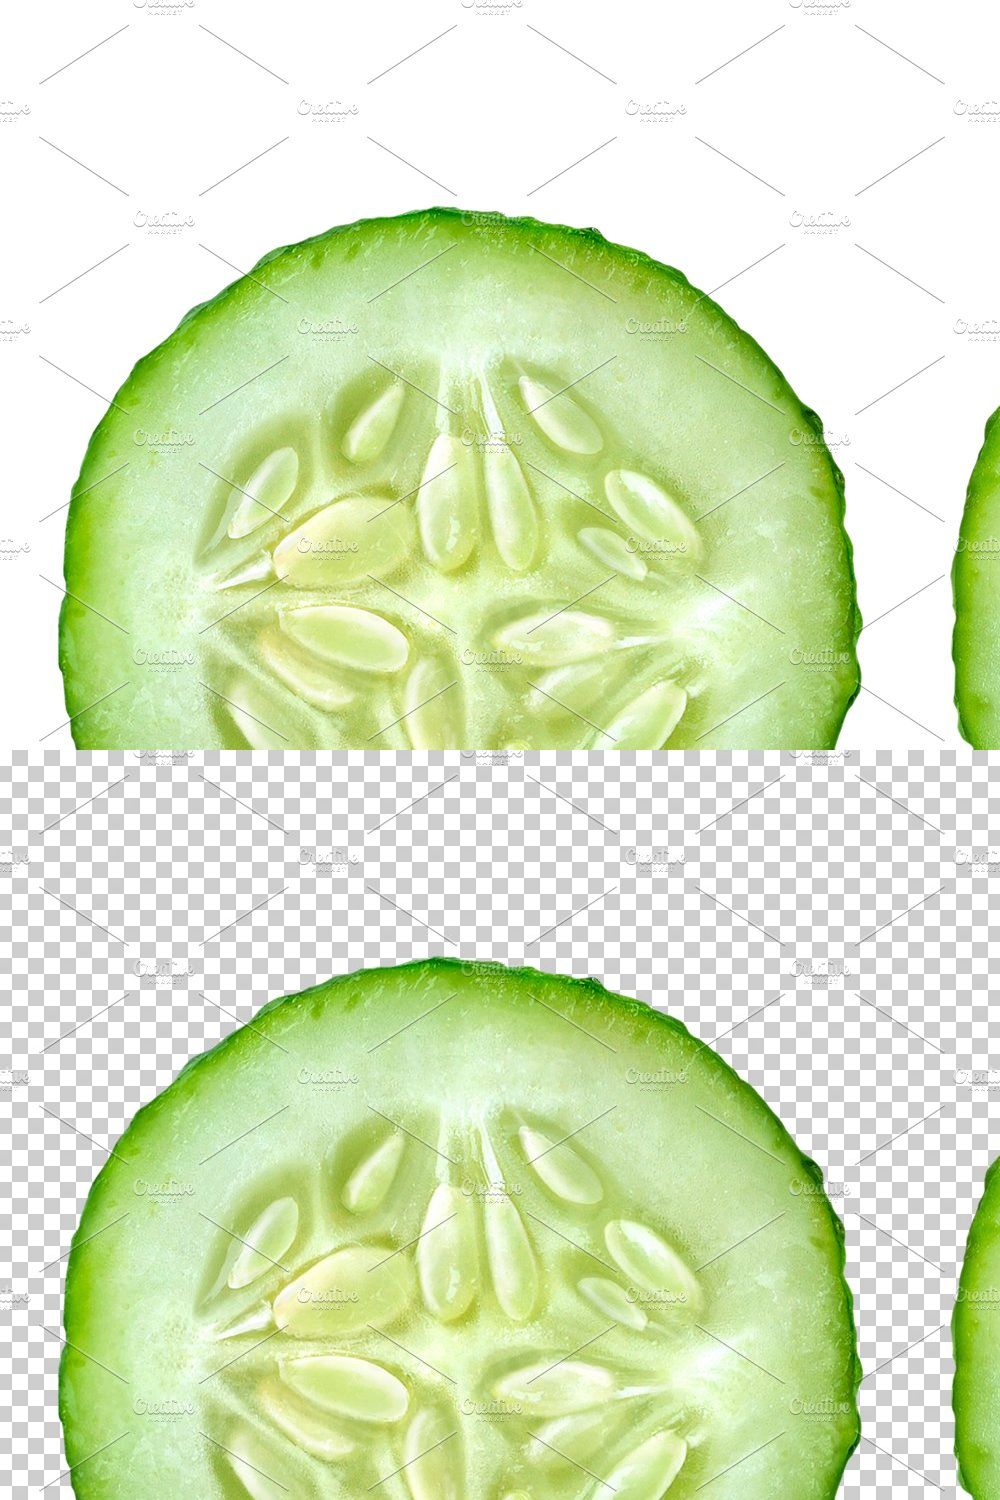 Two slices of cucumber pinterest preview image.